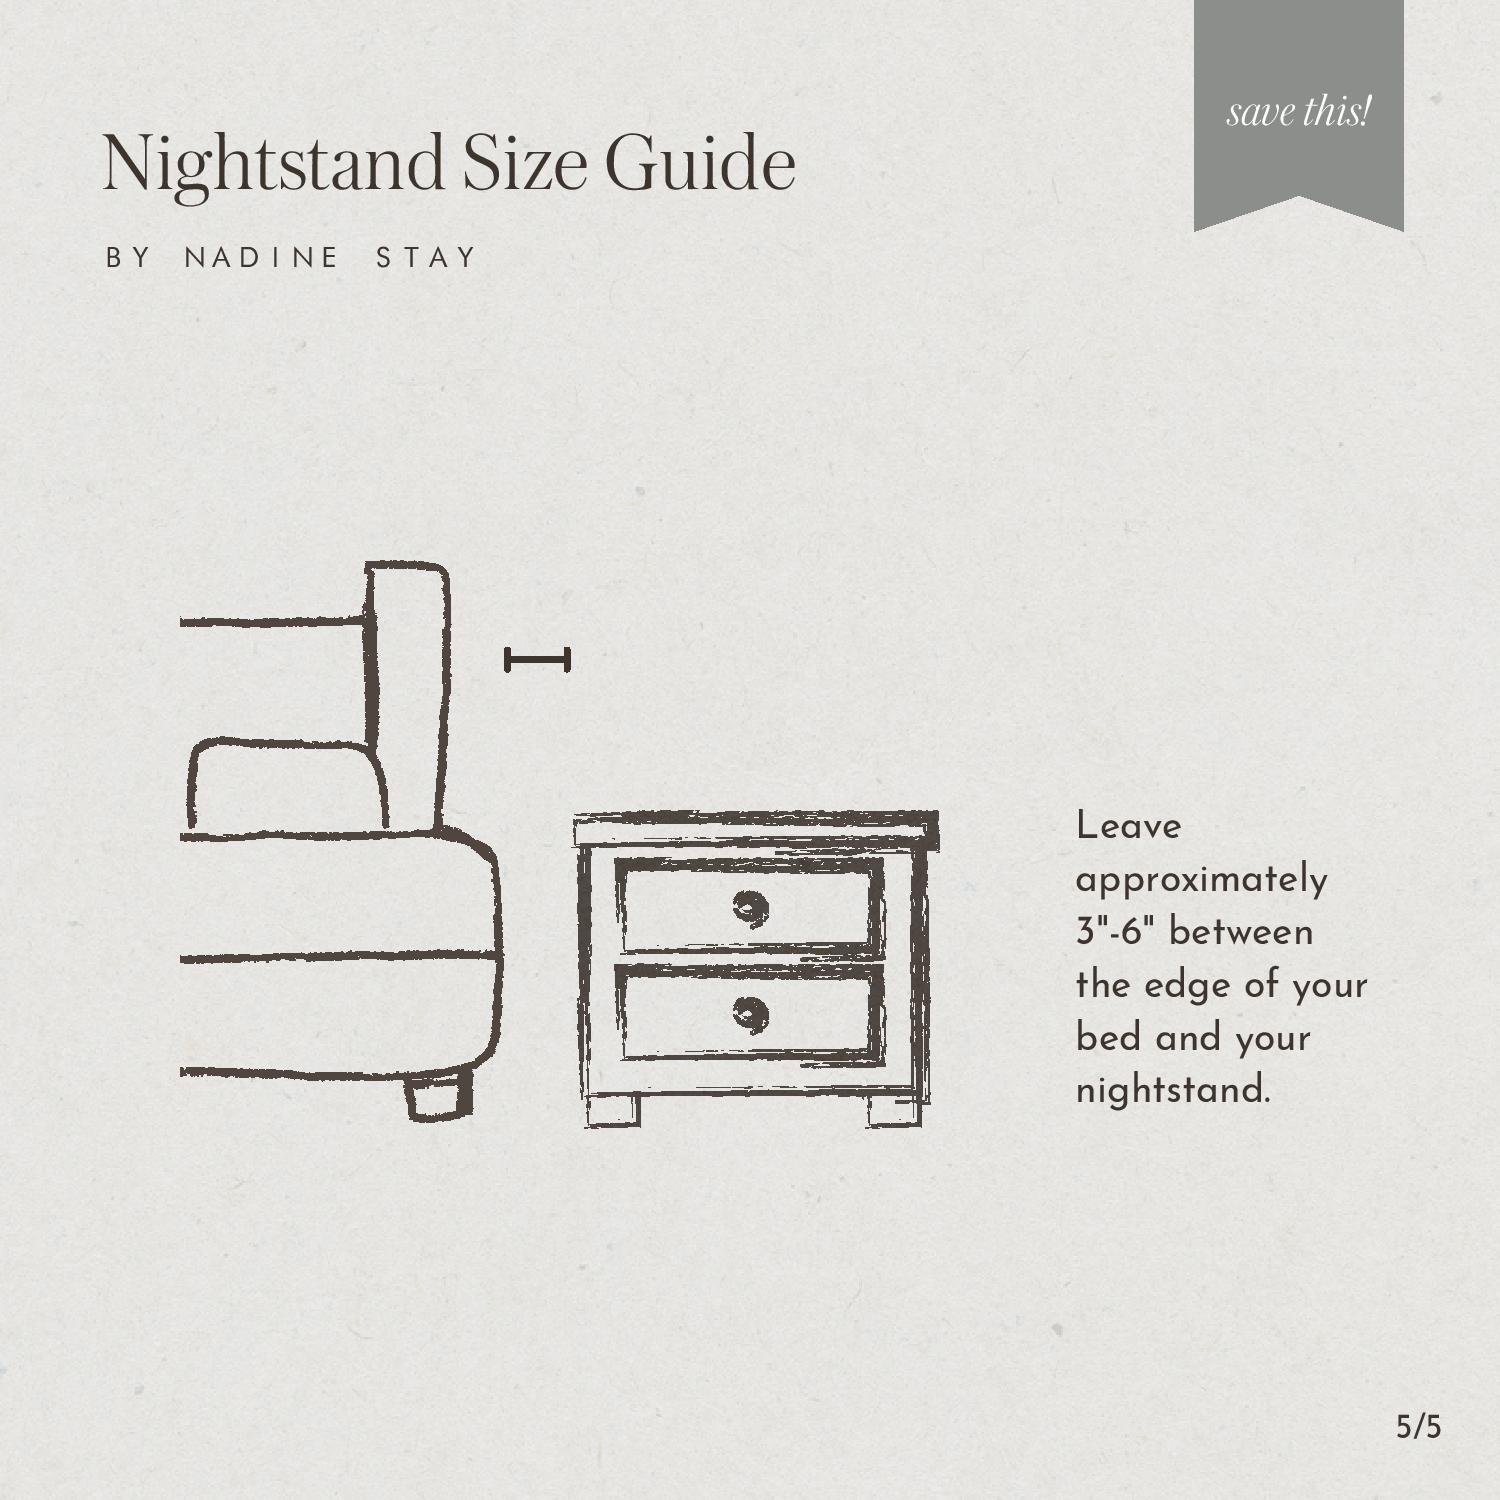 Nightstand Size & Placement Guide by Nadine Stay | What size nightstand you should get. Nightstand size guide. How to pick the right size nightstand. How far nightstand should be from bed.